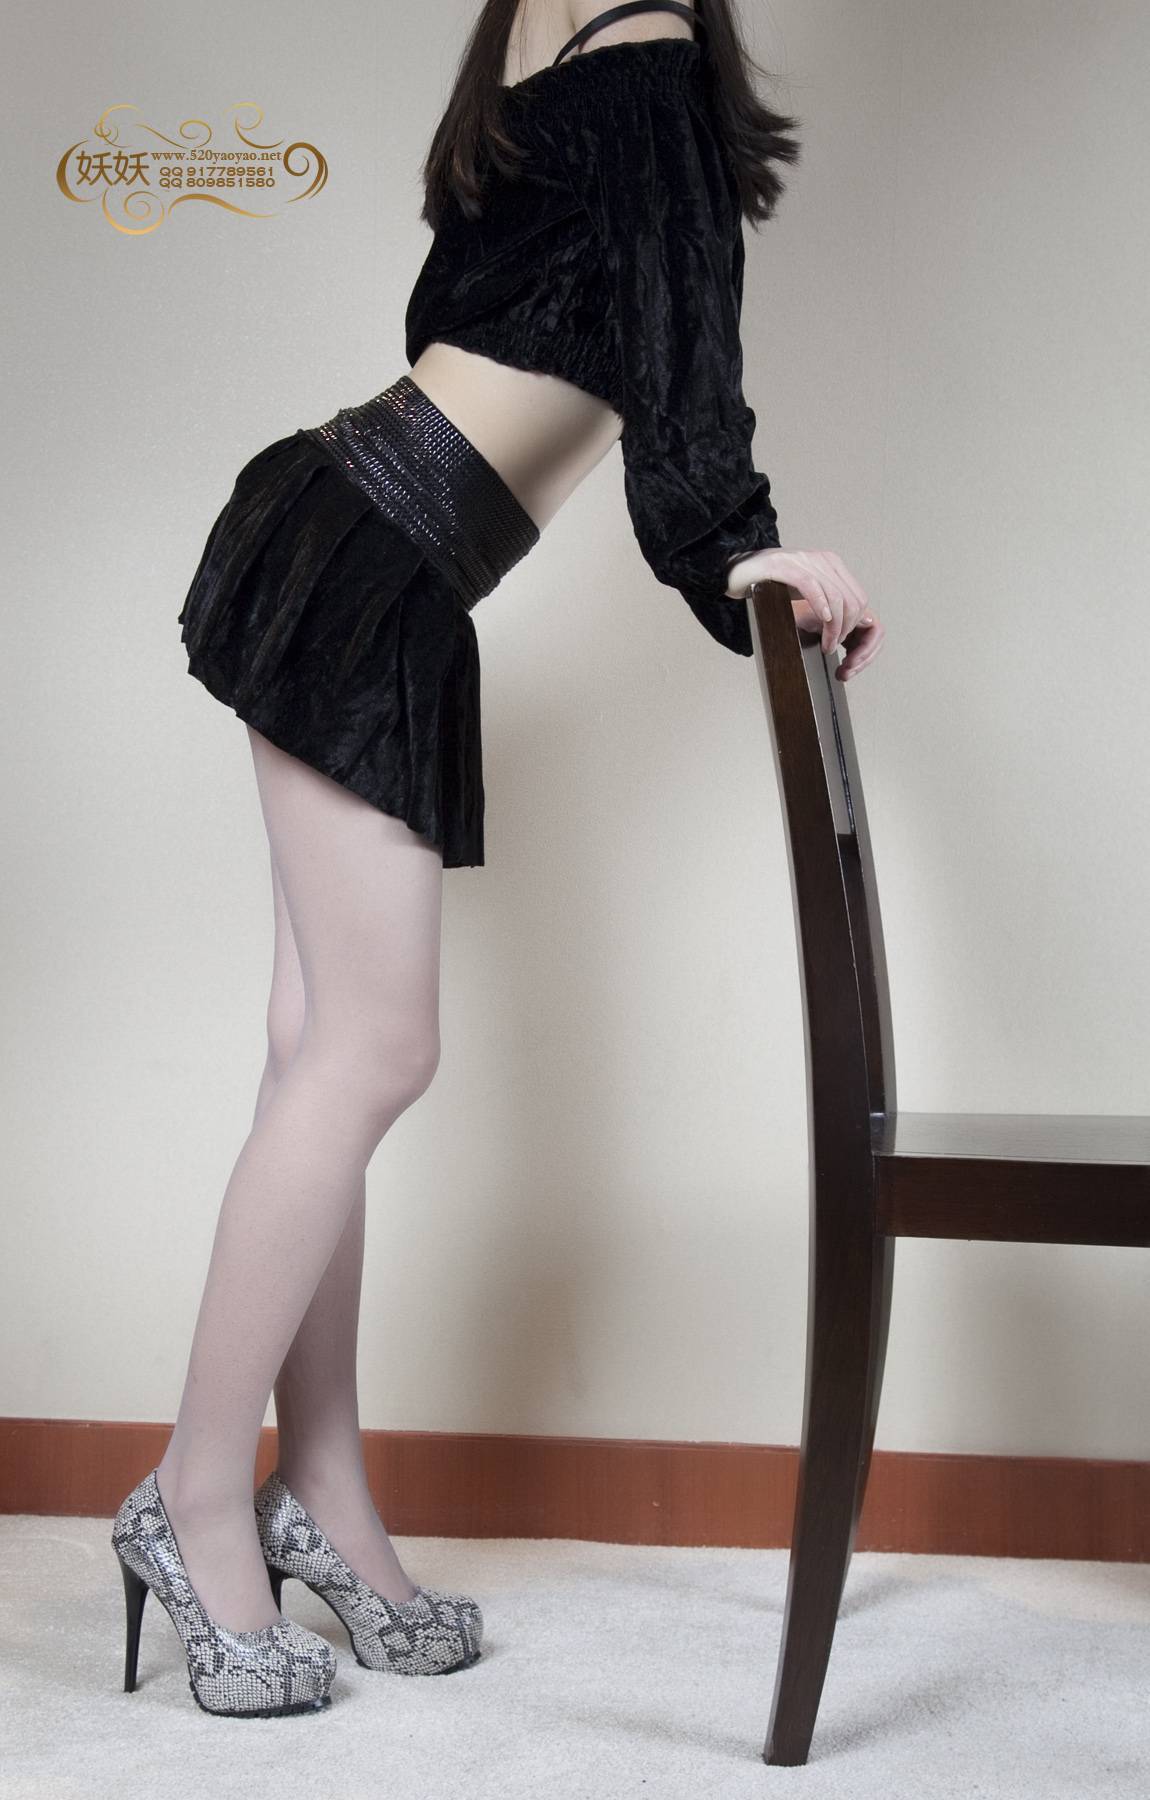 Sexy set of pictures of domestic silk stockings